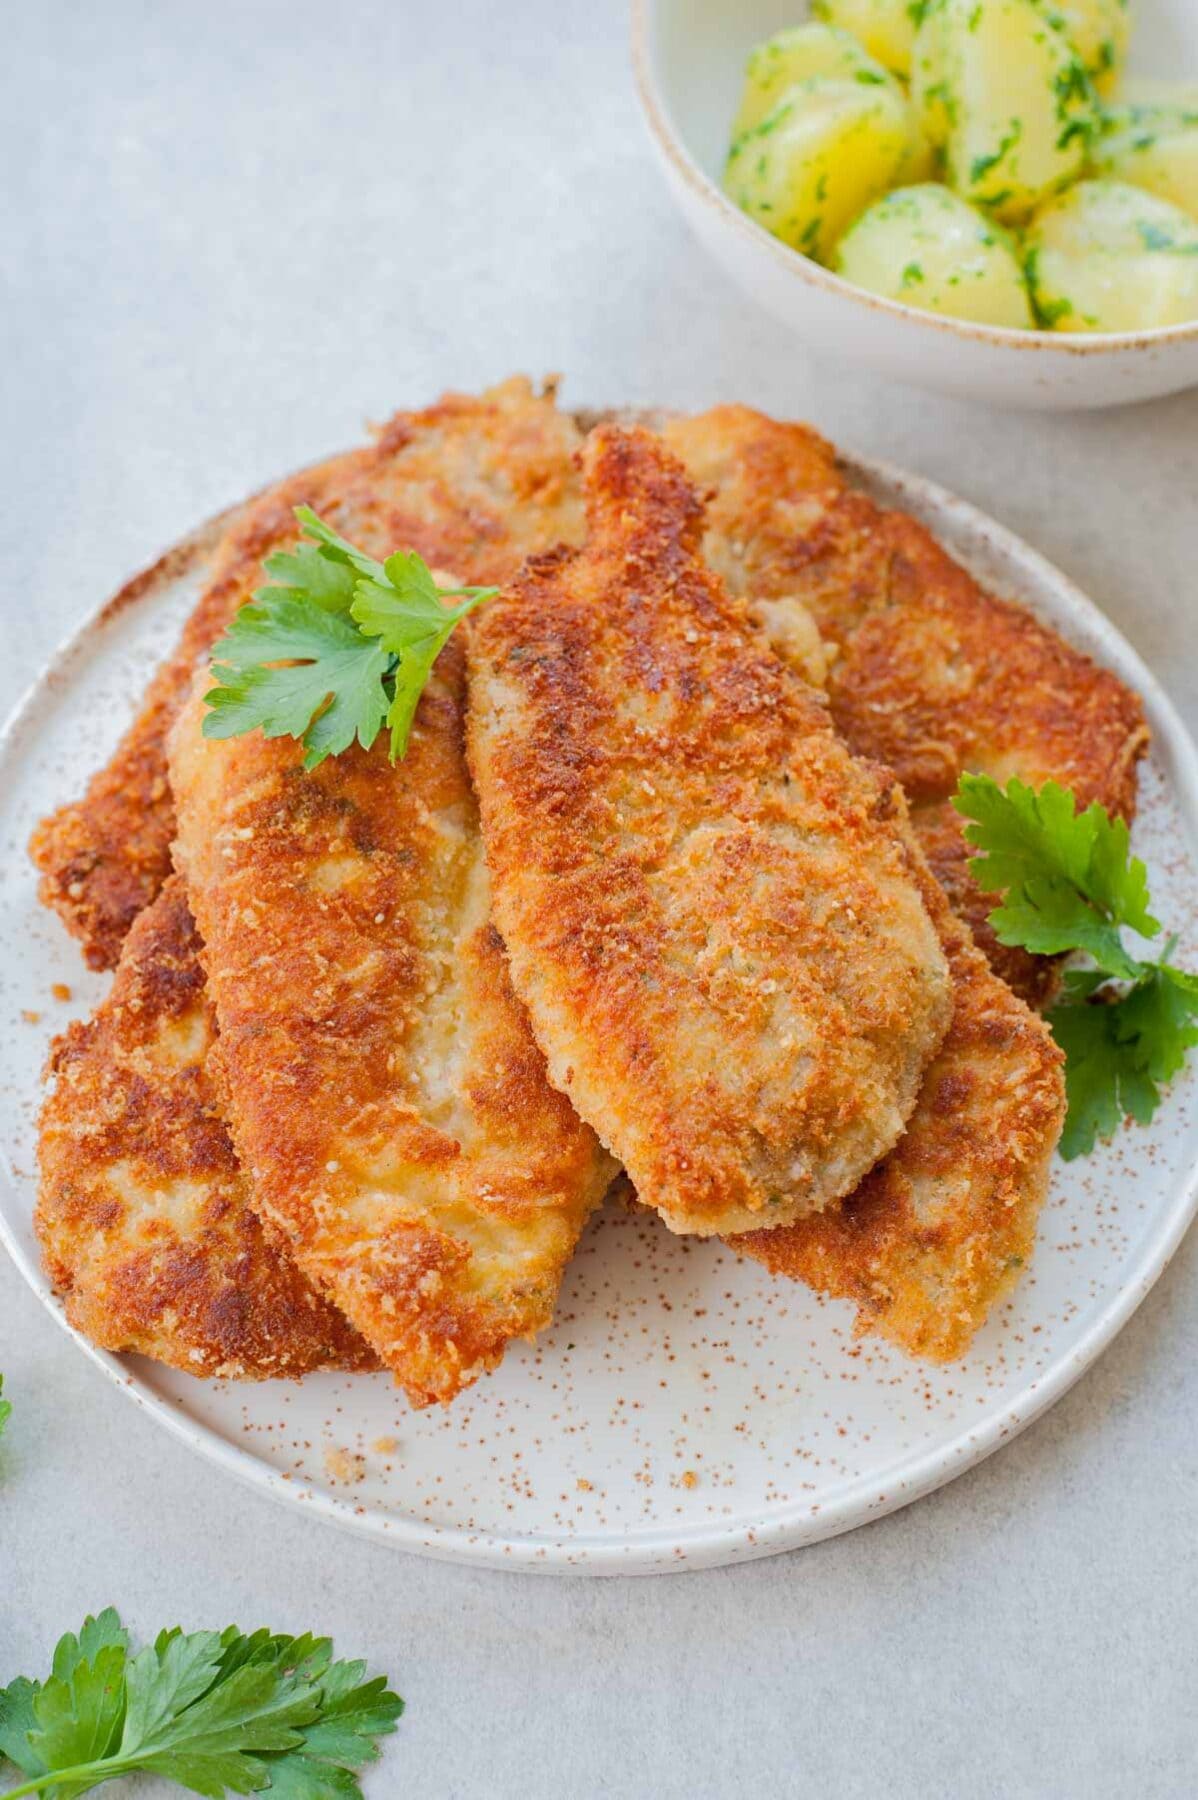 Breaded chicken cutlets on a white plate sprinkled with parsley.